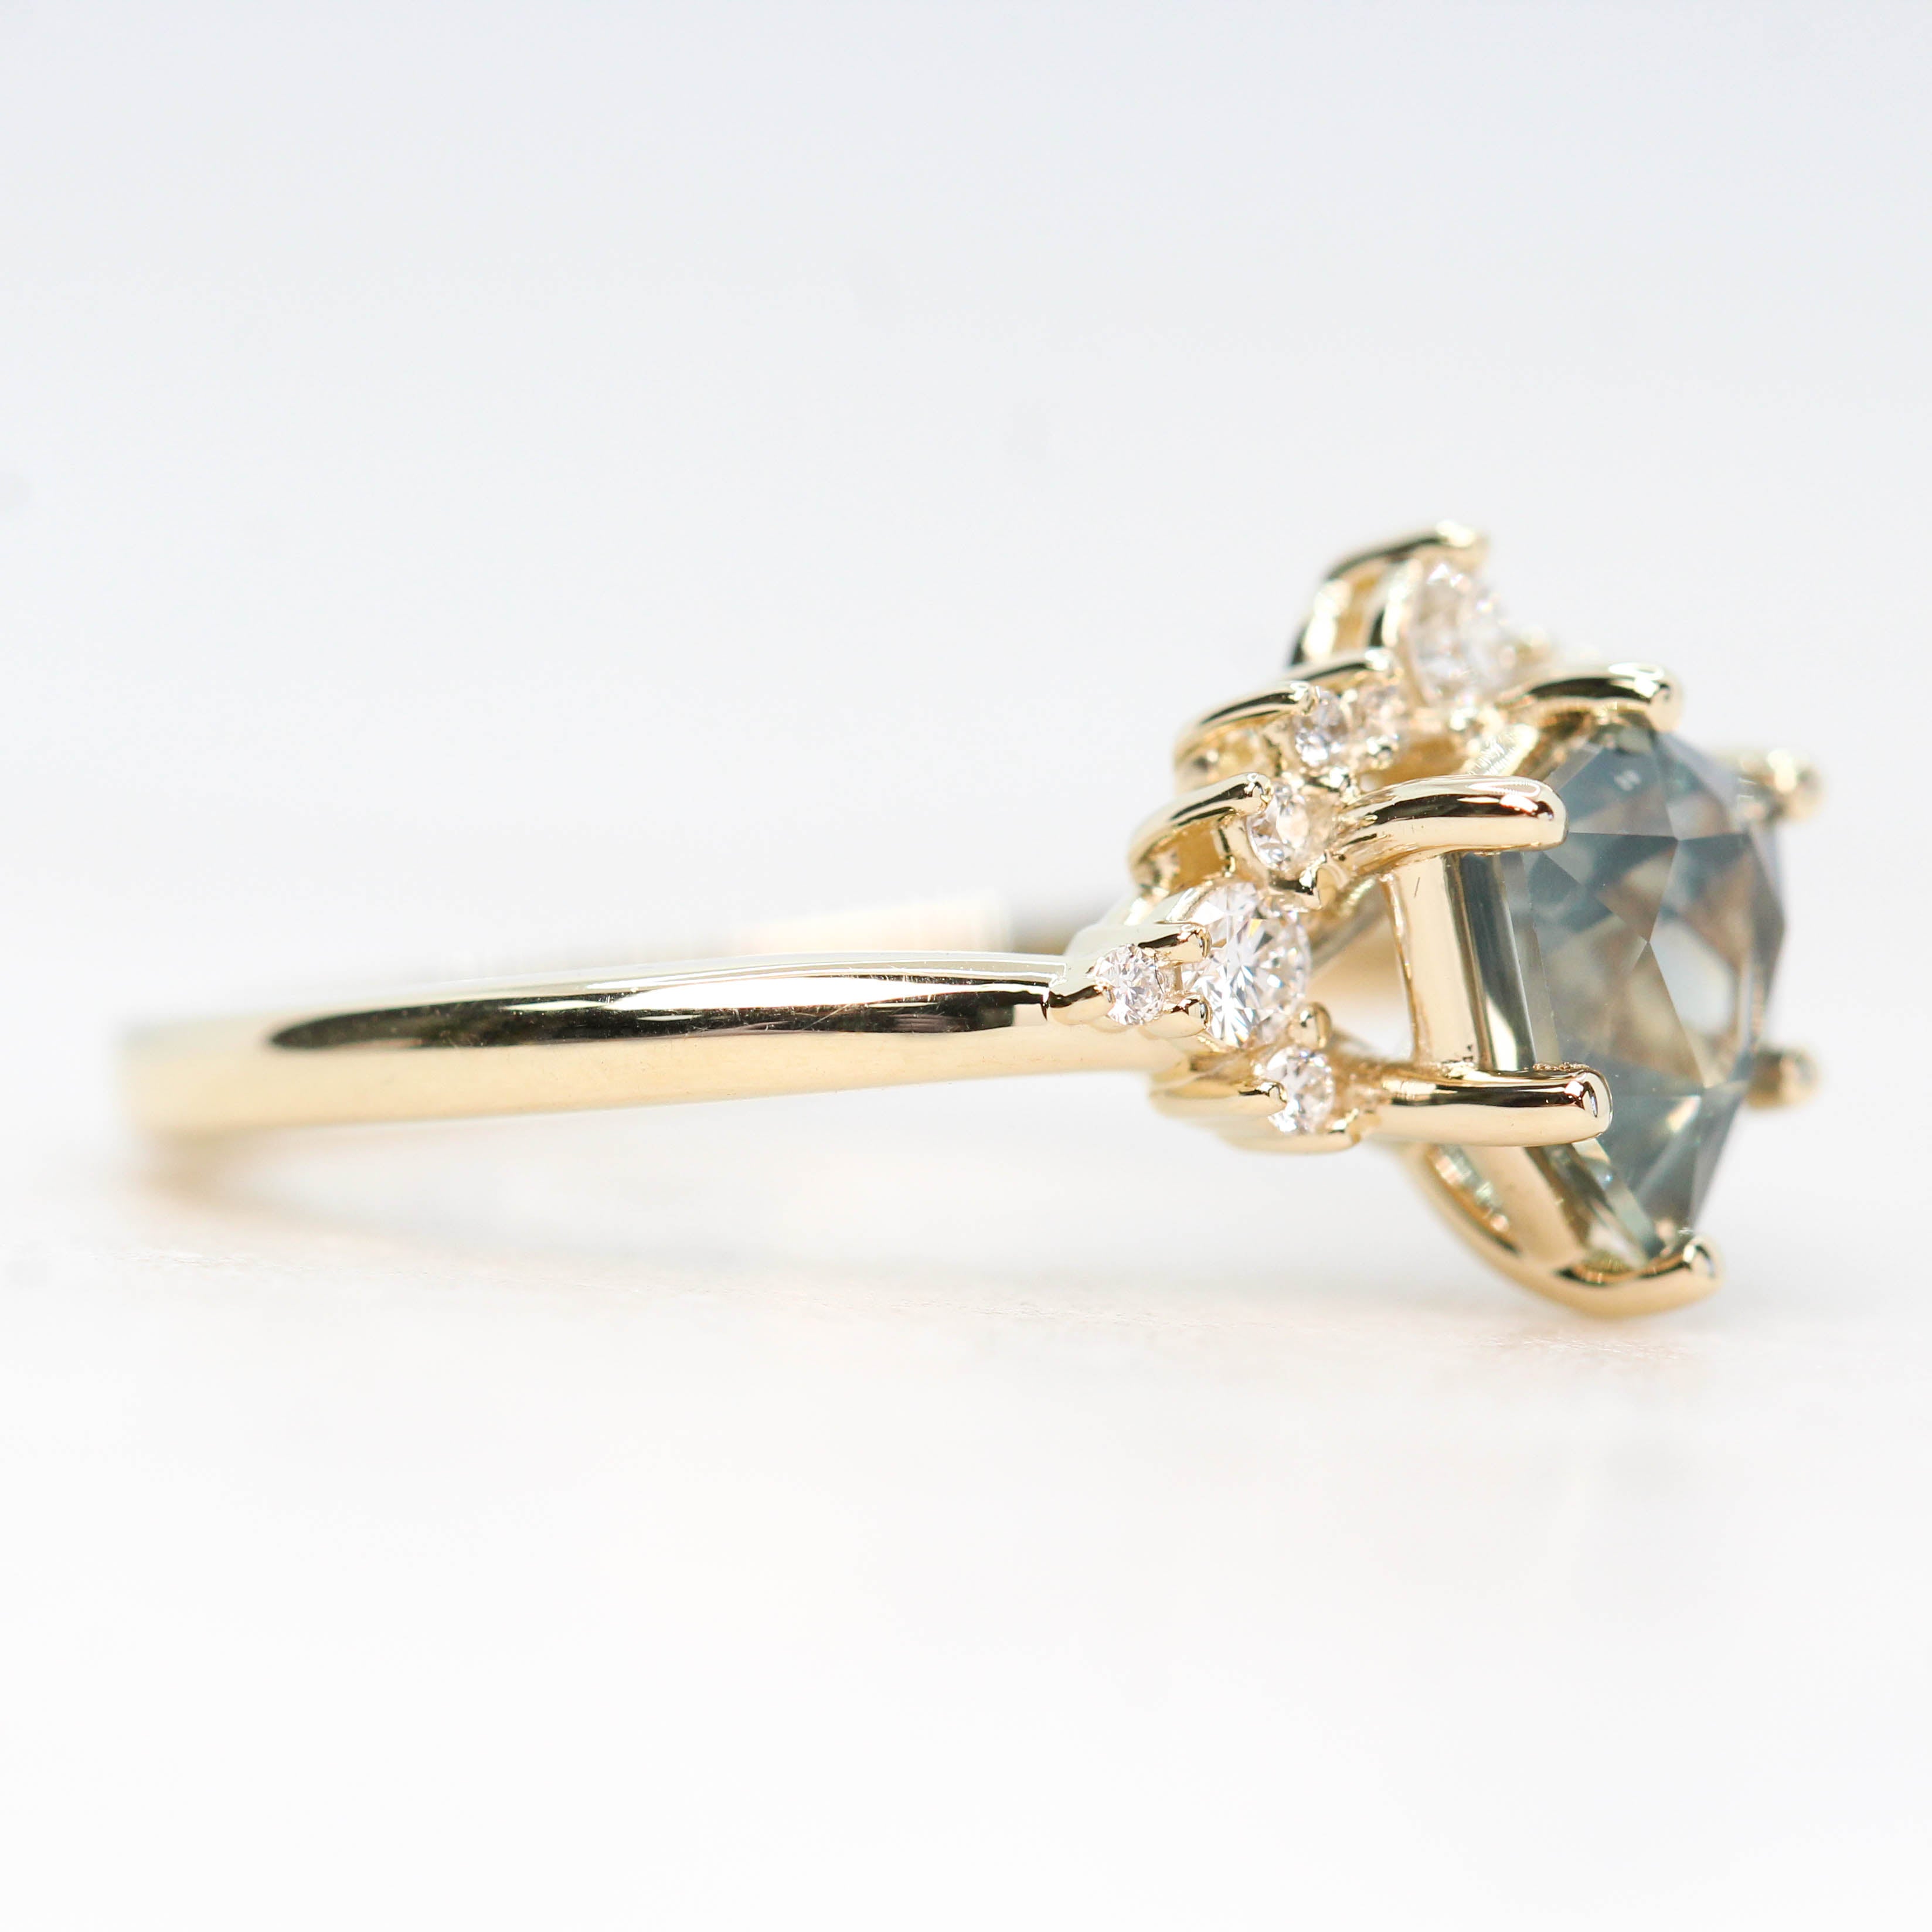 Athena Ring with a 1.33 Carat Blue Shield Sapphire and Accent Diamonds in 14k Yellow Gold - Ready to Size and Ship - Midwinter Co. Alternative Bridal Rings and Modern Fine Jewelry